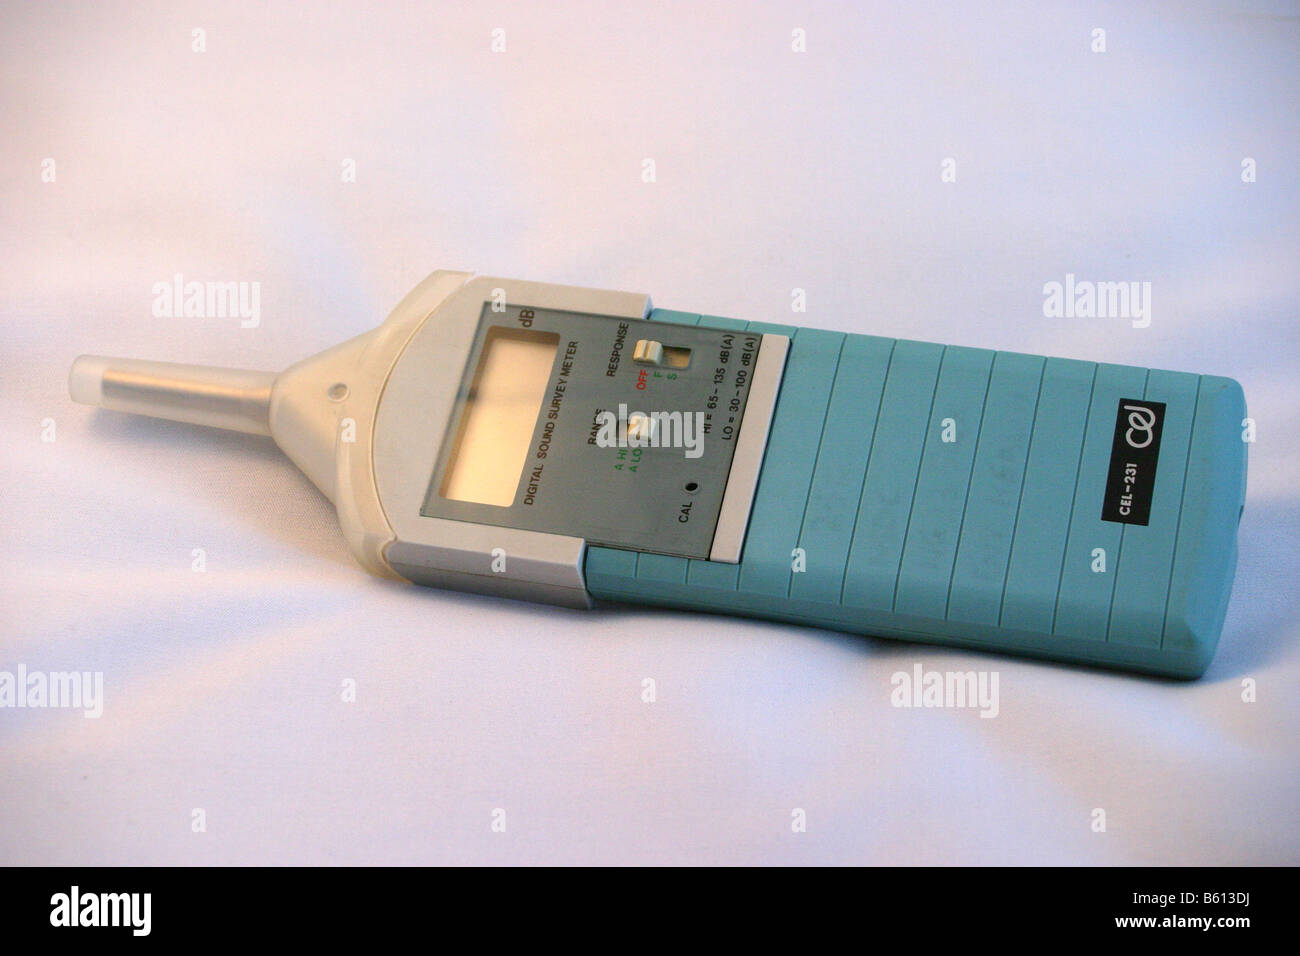 digital sound survey meter or noise level meter used for measuring noise levels to determine nuisance Stock Photo